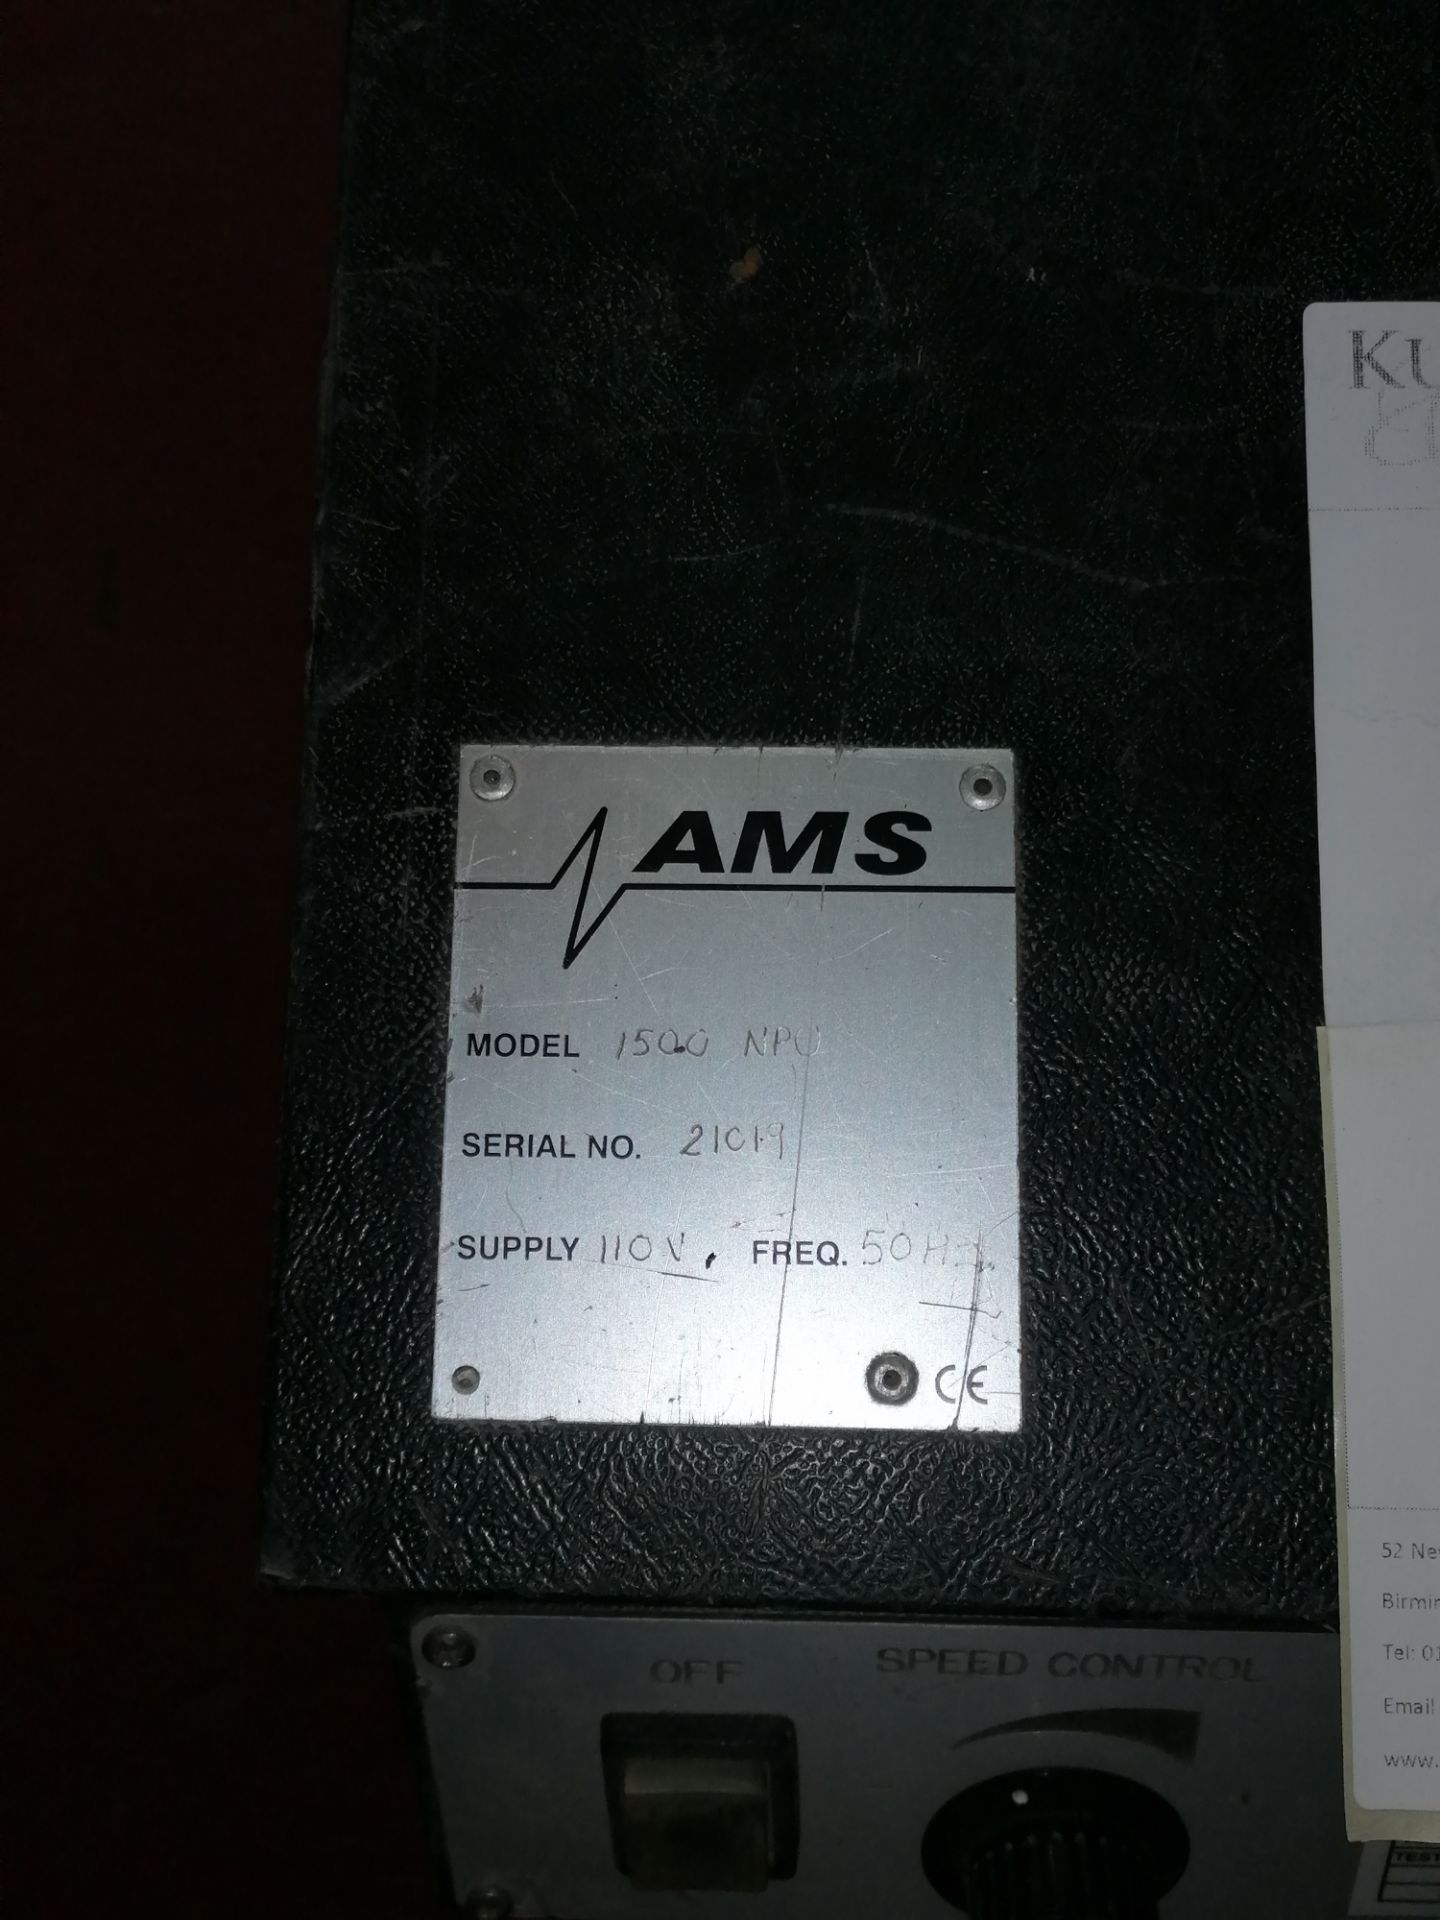 AMS NPU 1500Extractor/Filter Unit 110V, Serial No. 21019 - Image 7 of 7